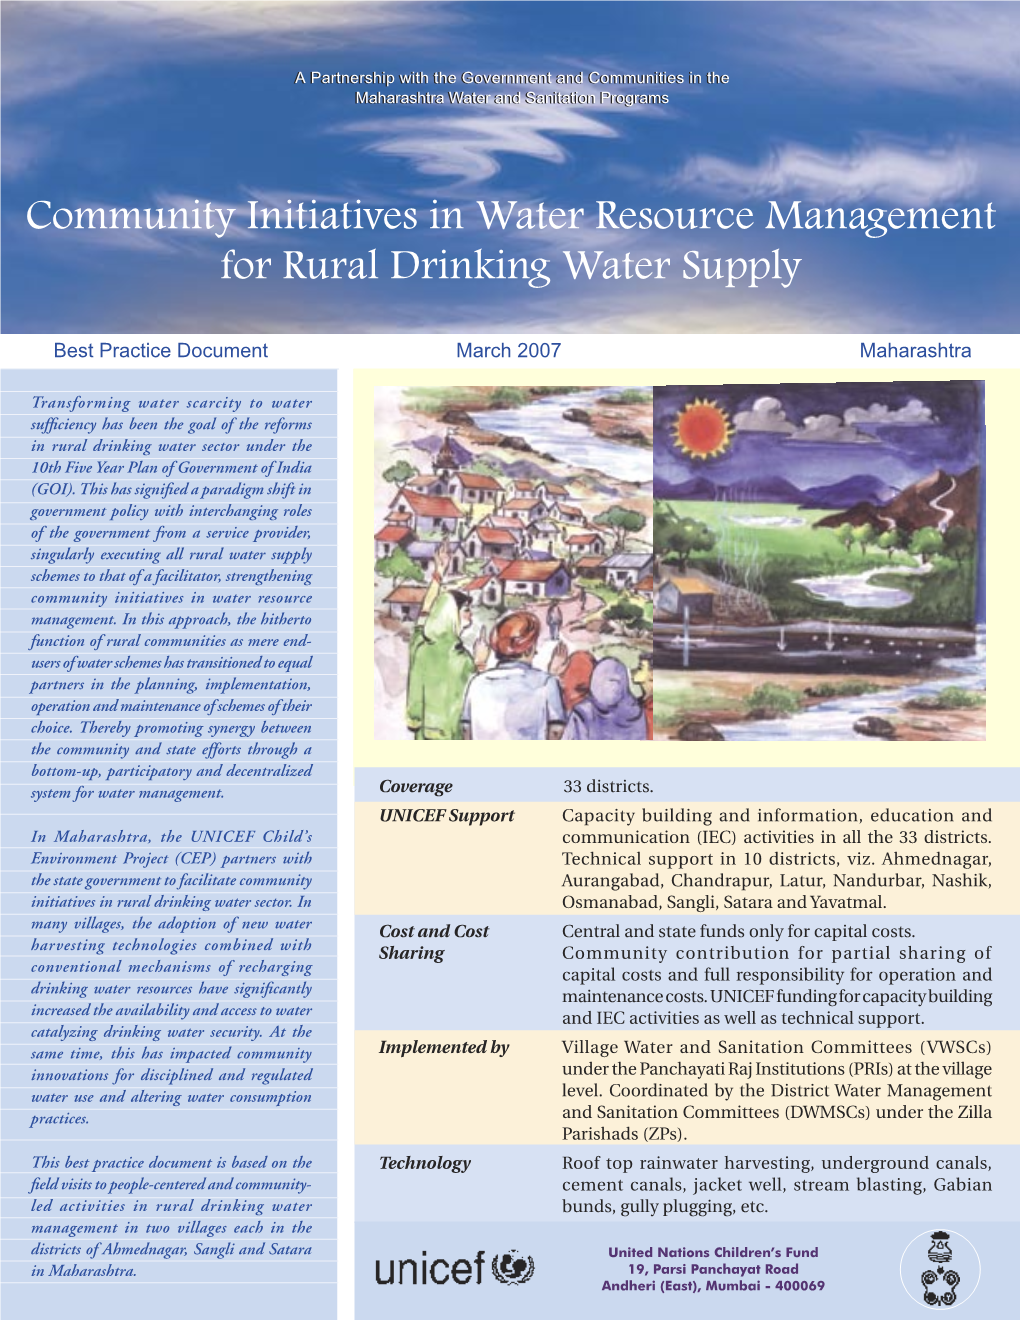 Community Initiatives in Water Resource Management for Rural Drinking Water Supply